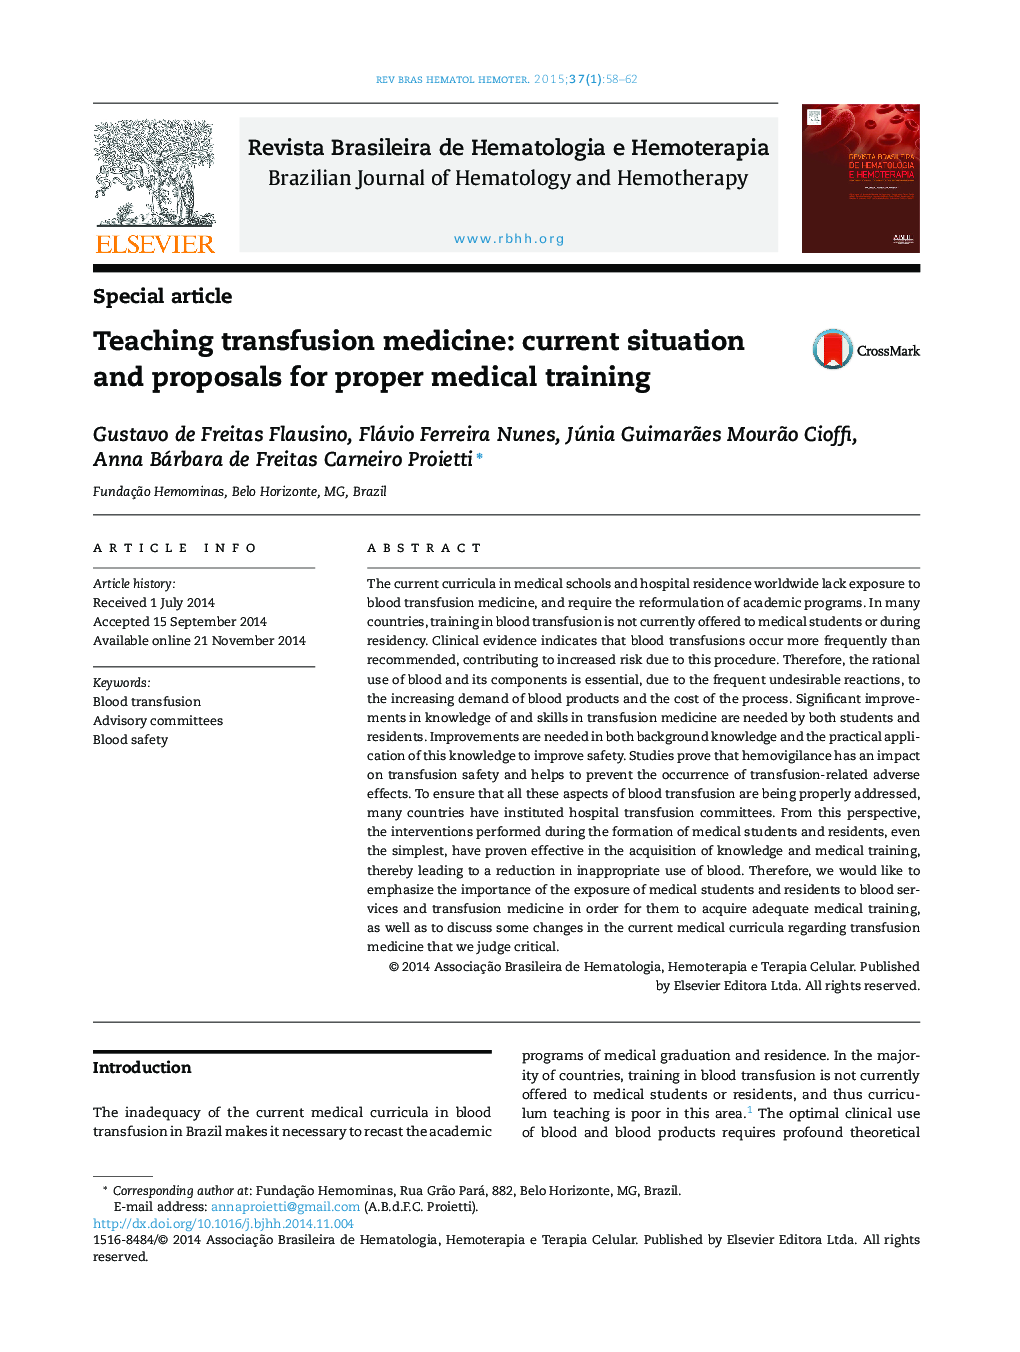 Teaching transfusion medicine: current situation and proposals for proper medical training